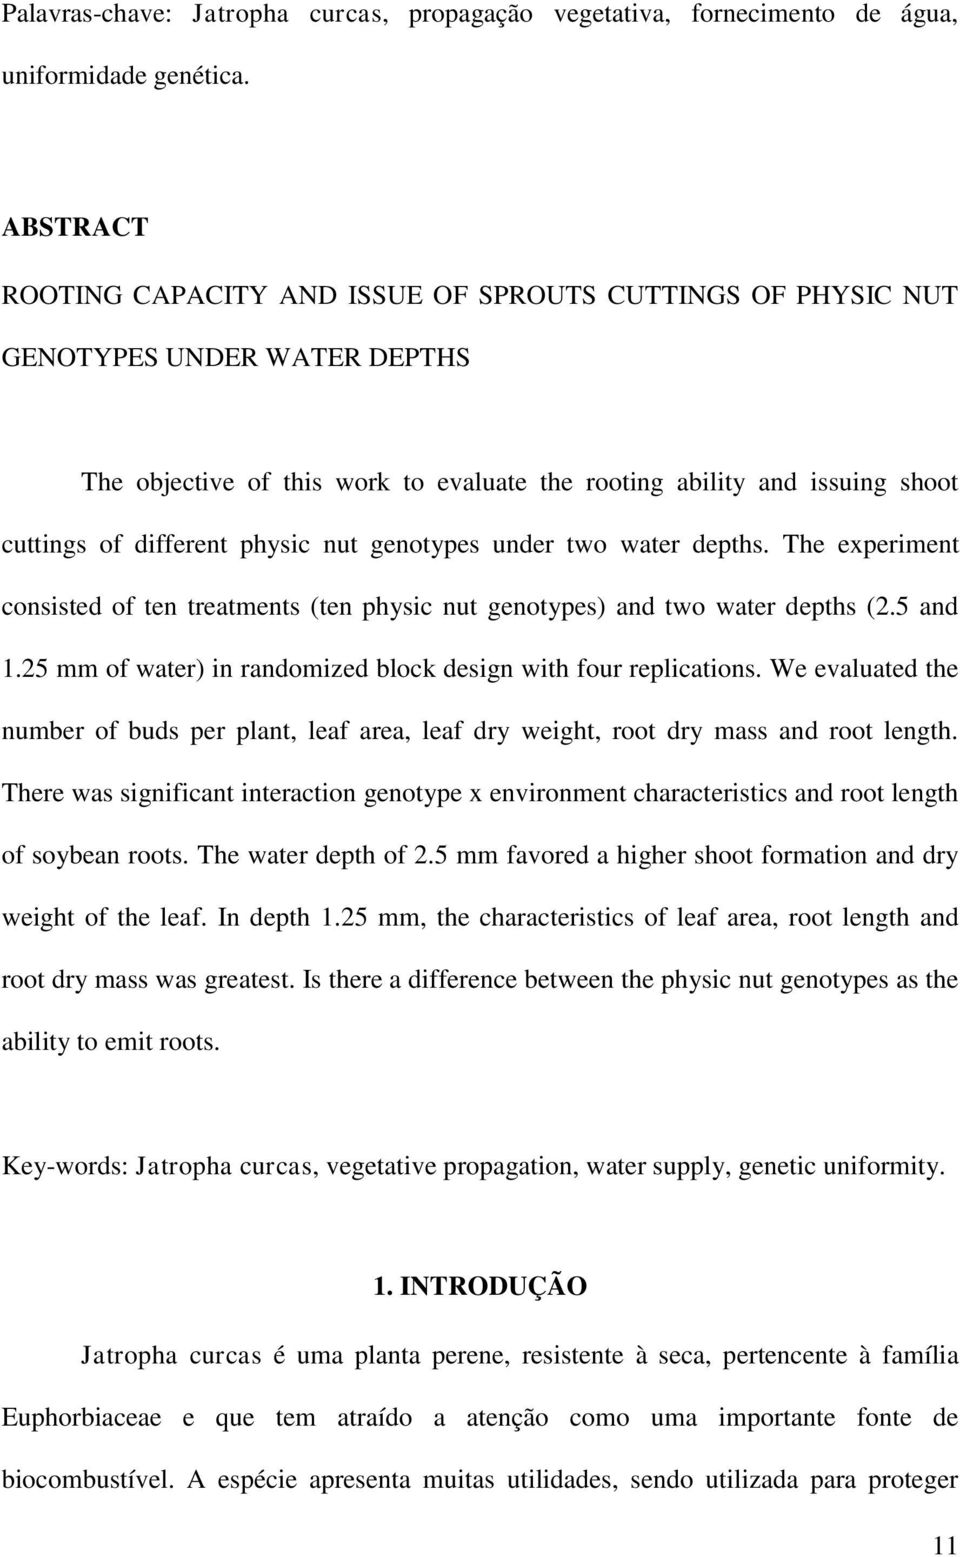 physic nut genotypes under two water depths. The experiment consisted of ten treatments (ten physic nut genotypes) and two water depths (2.5 and 1.